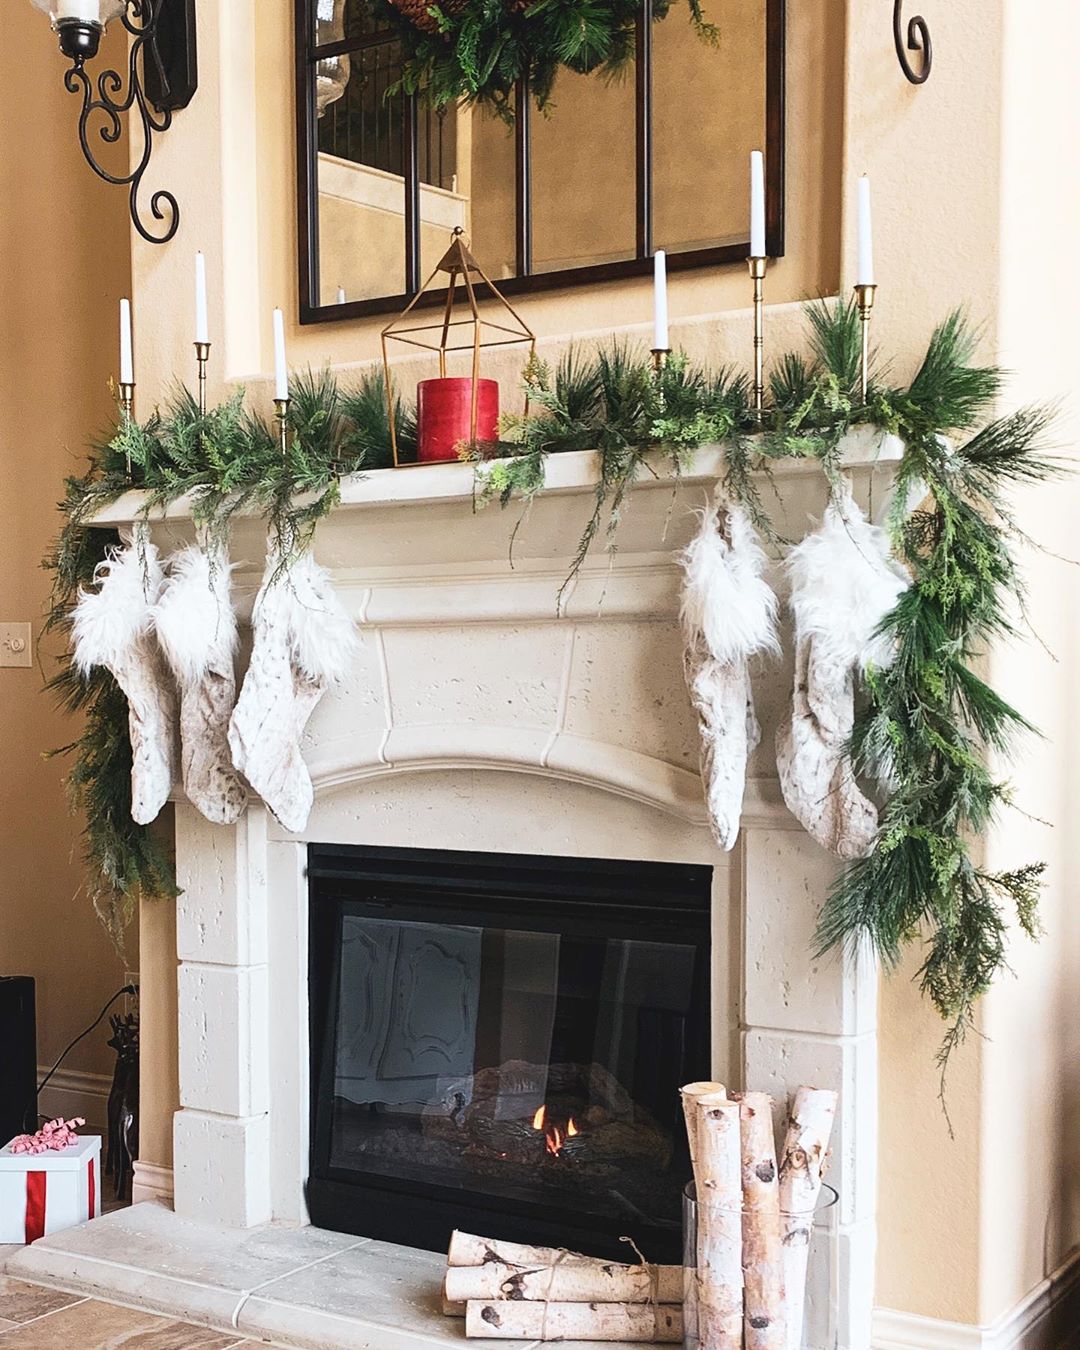 Mantel decorated for Christmas. Photo by Instagram user @lifeofalley